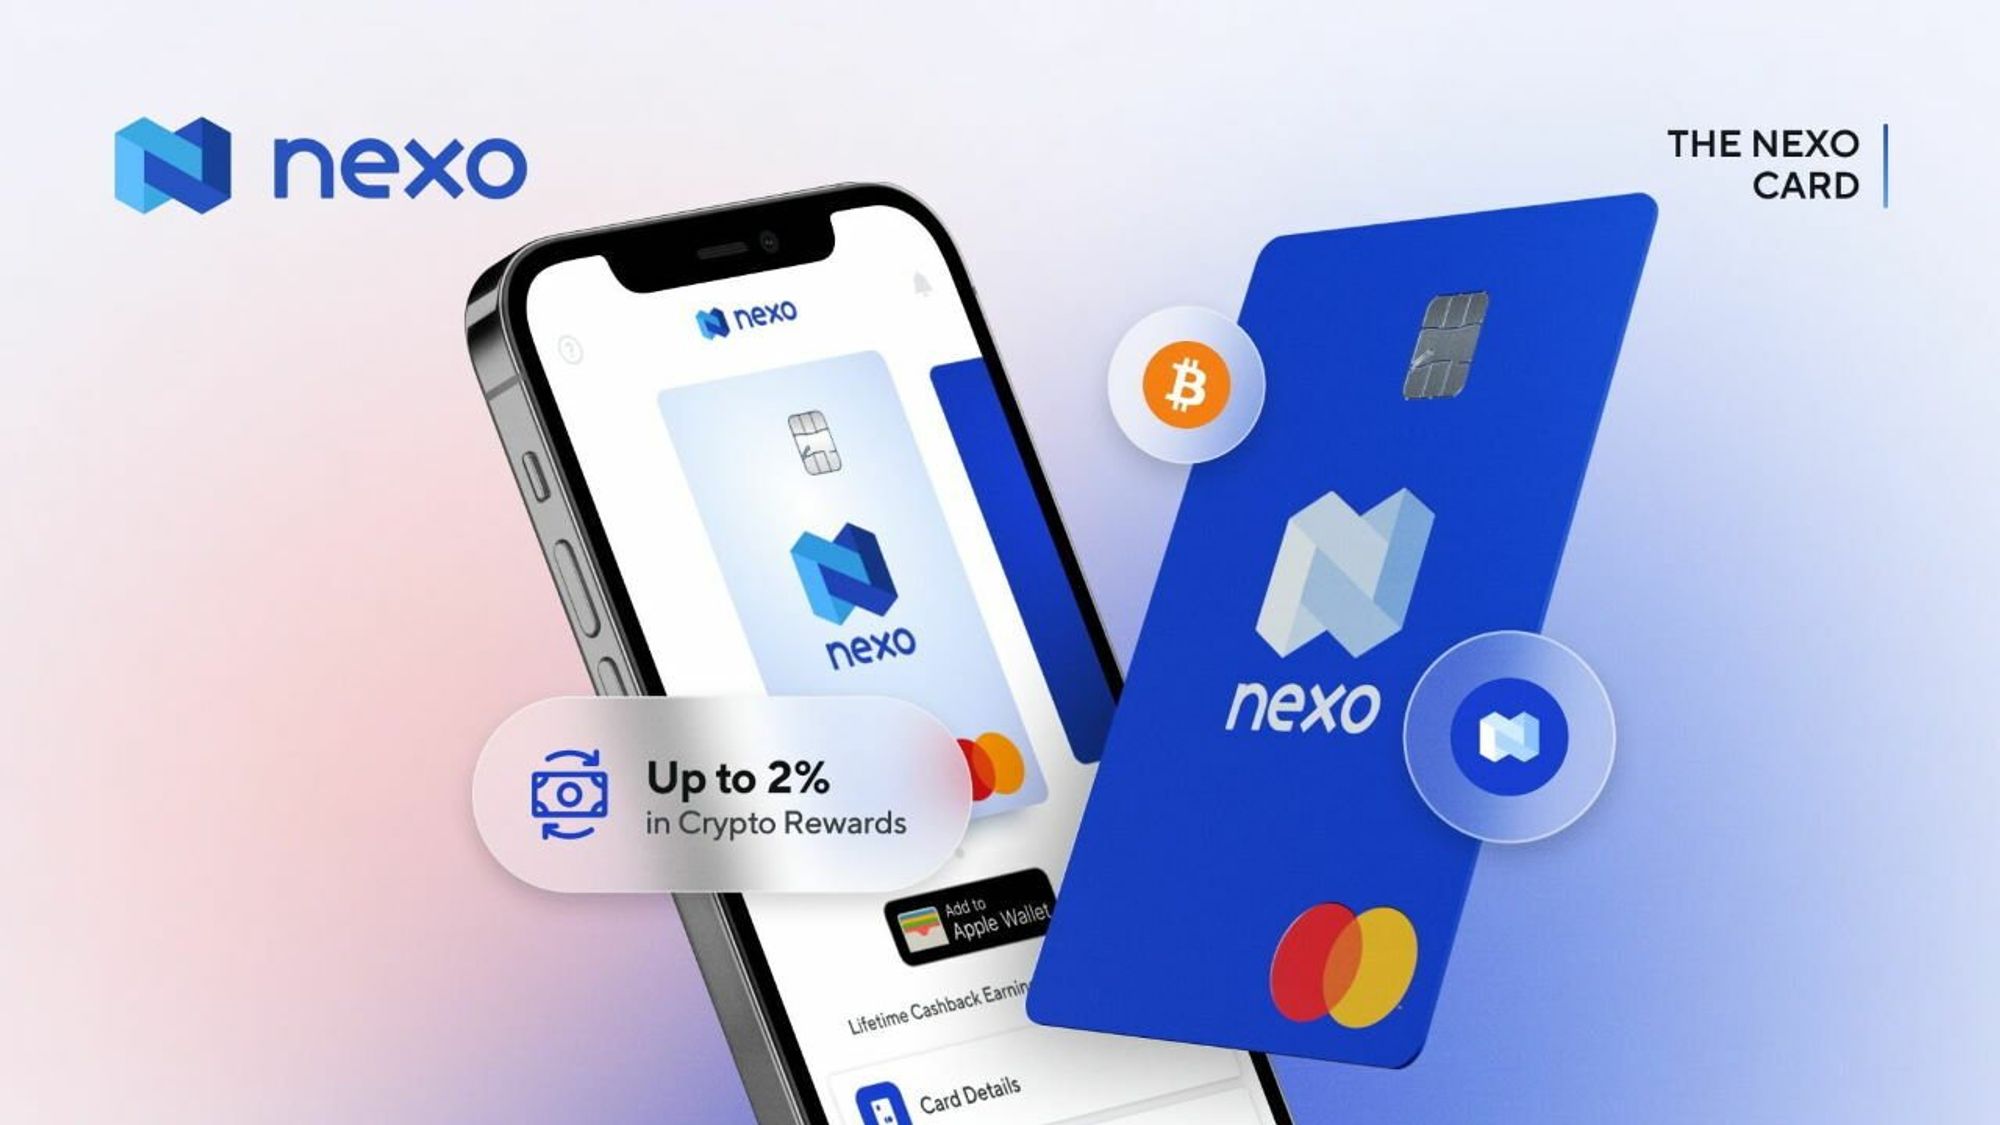 Nexo, Mastercard Launch World's First Crypto-Backed Card | PCMag